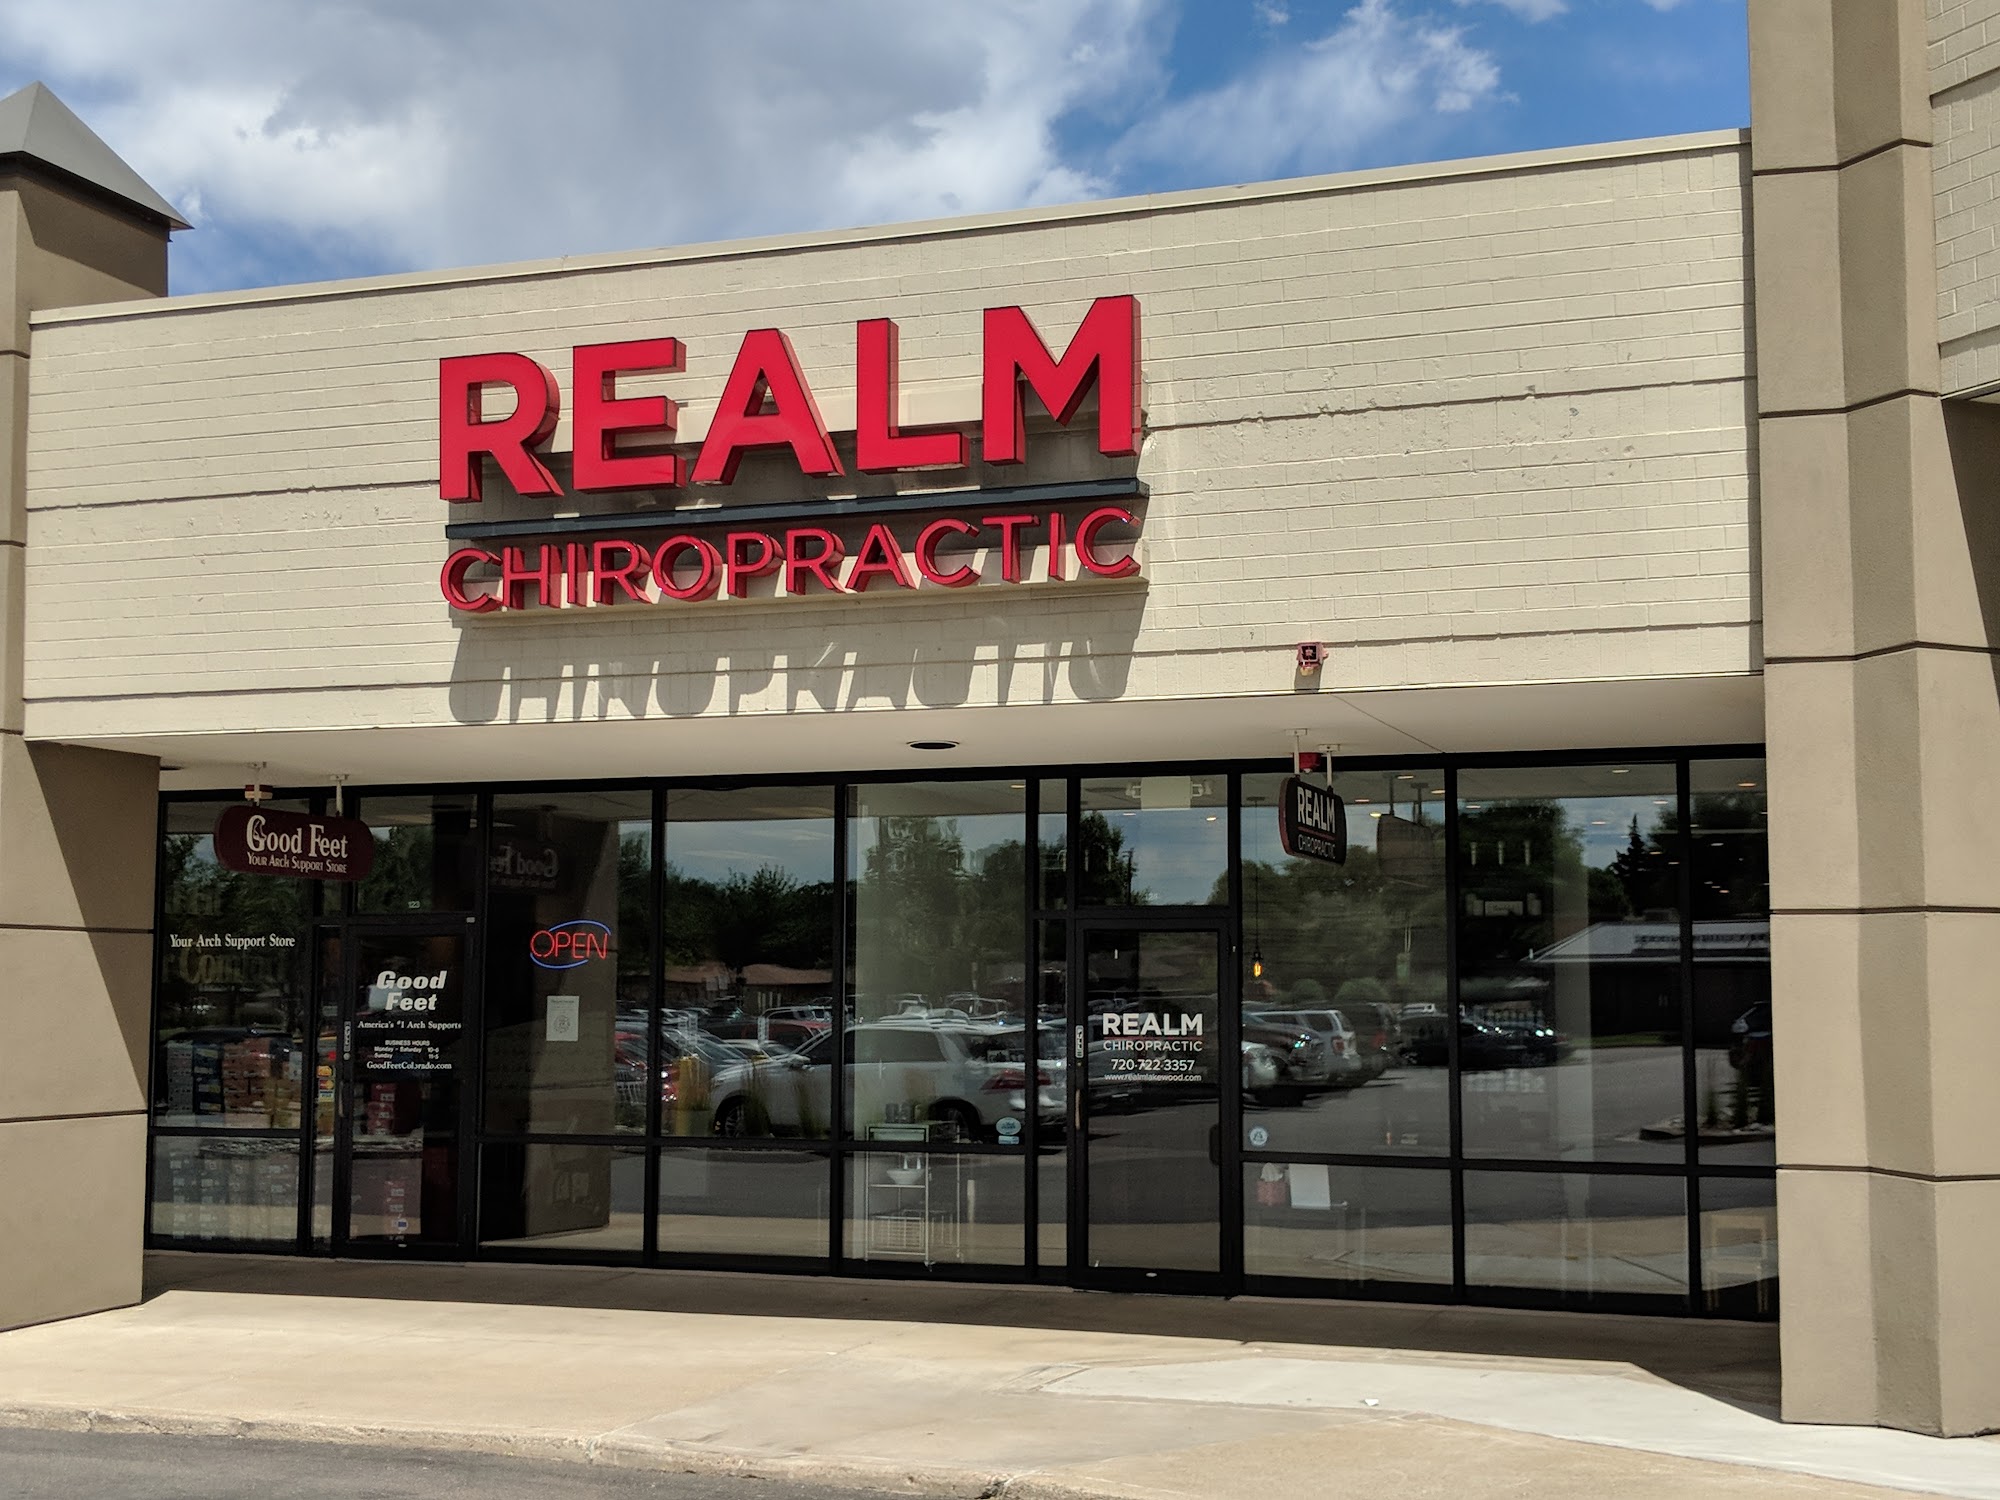 REALM Chiropractic